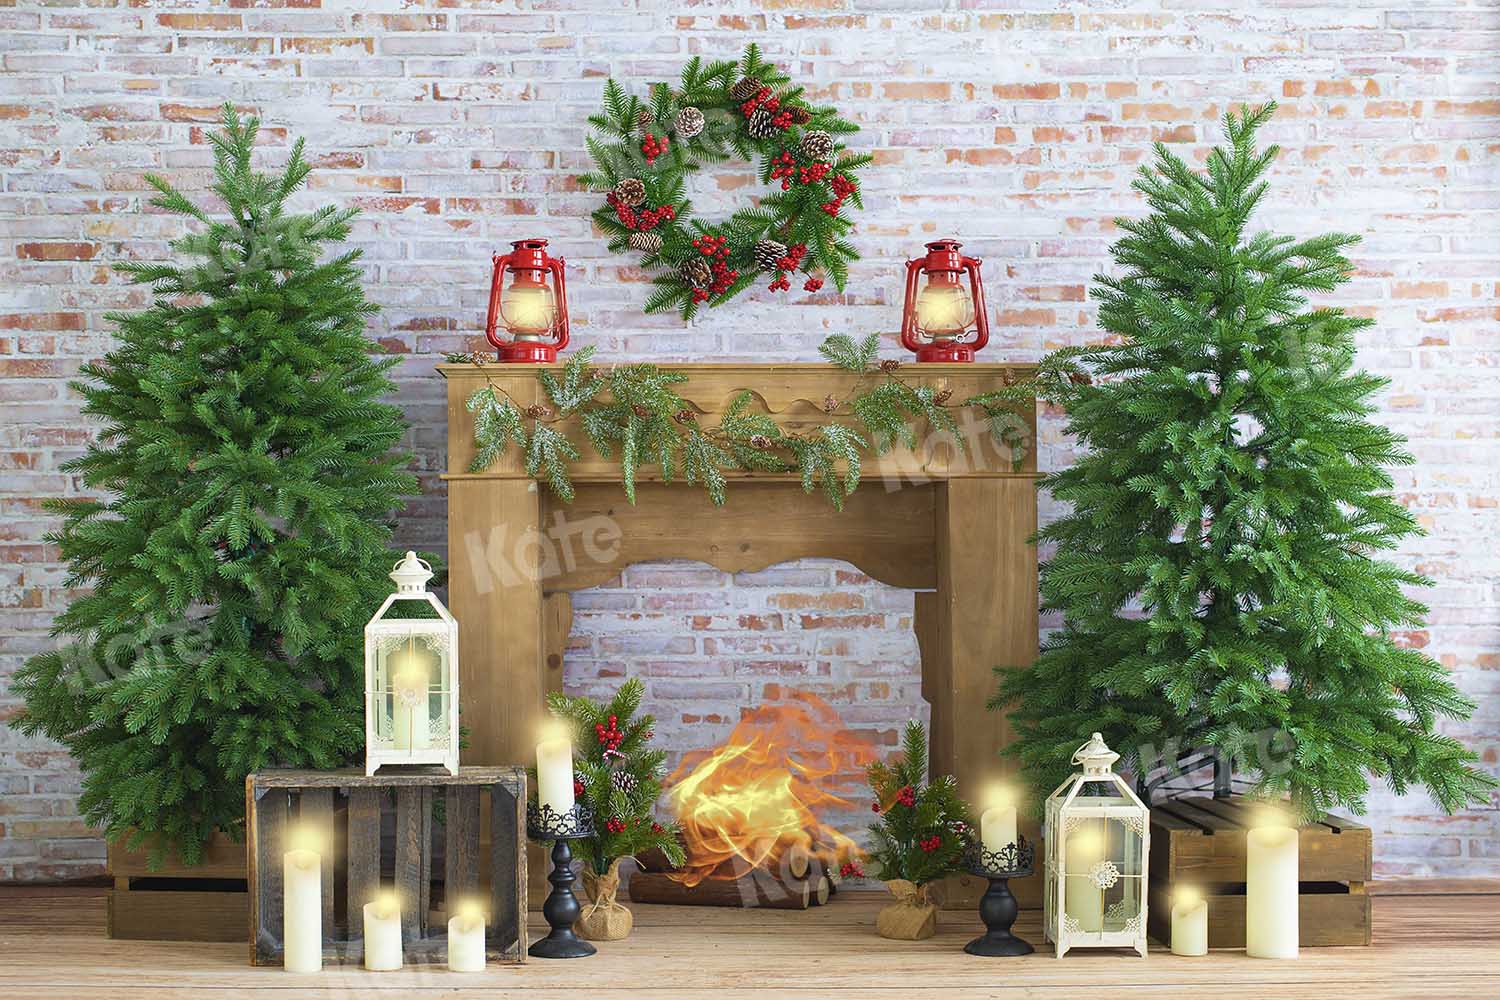 Kate Christmas Candle White Brick Fireplace Backdrop Designed by Emetselch